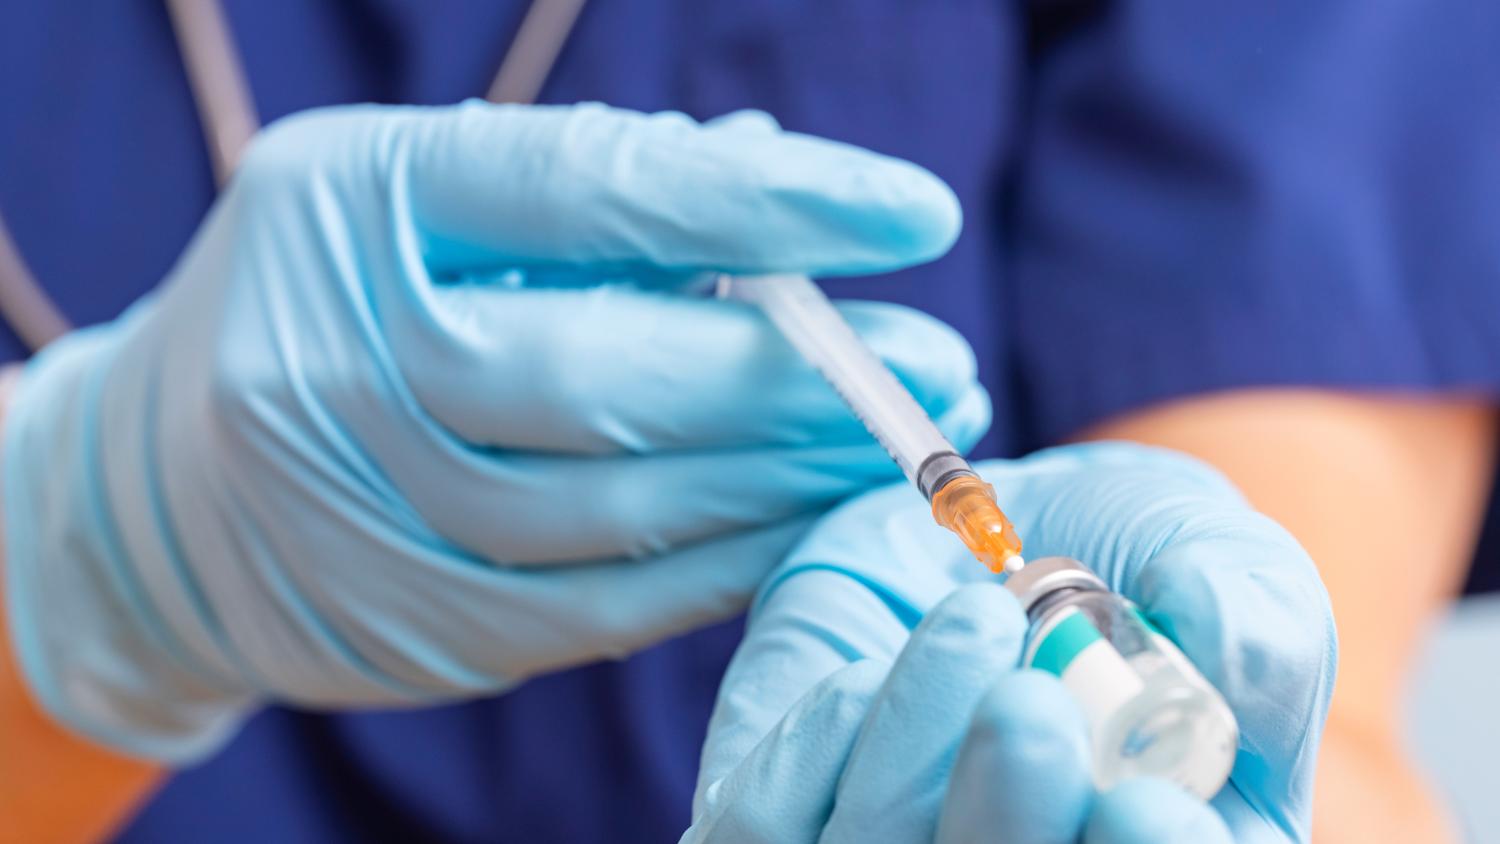 Close-up image of health care professional filling syringe with medicine from a vial